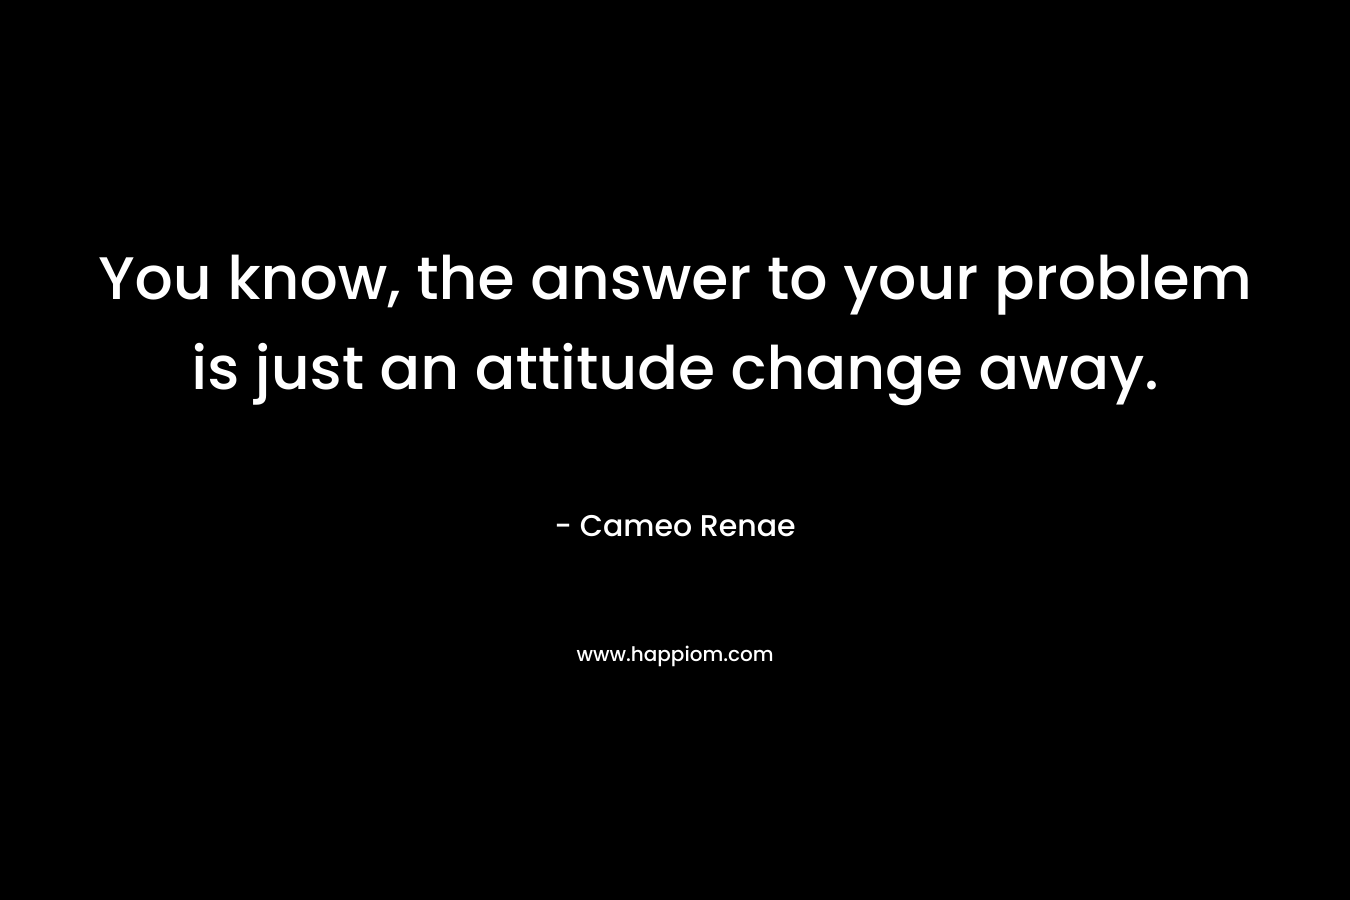 You know, the answer to your problem is just an attitude change away. – Cameo Renae